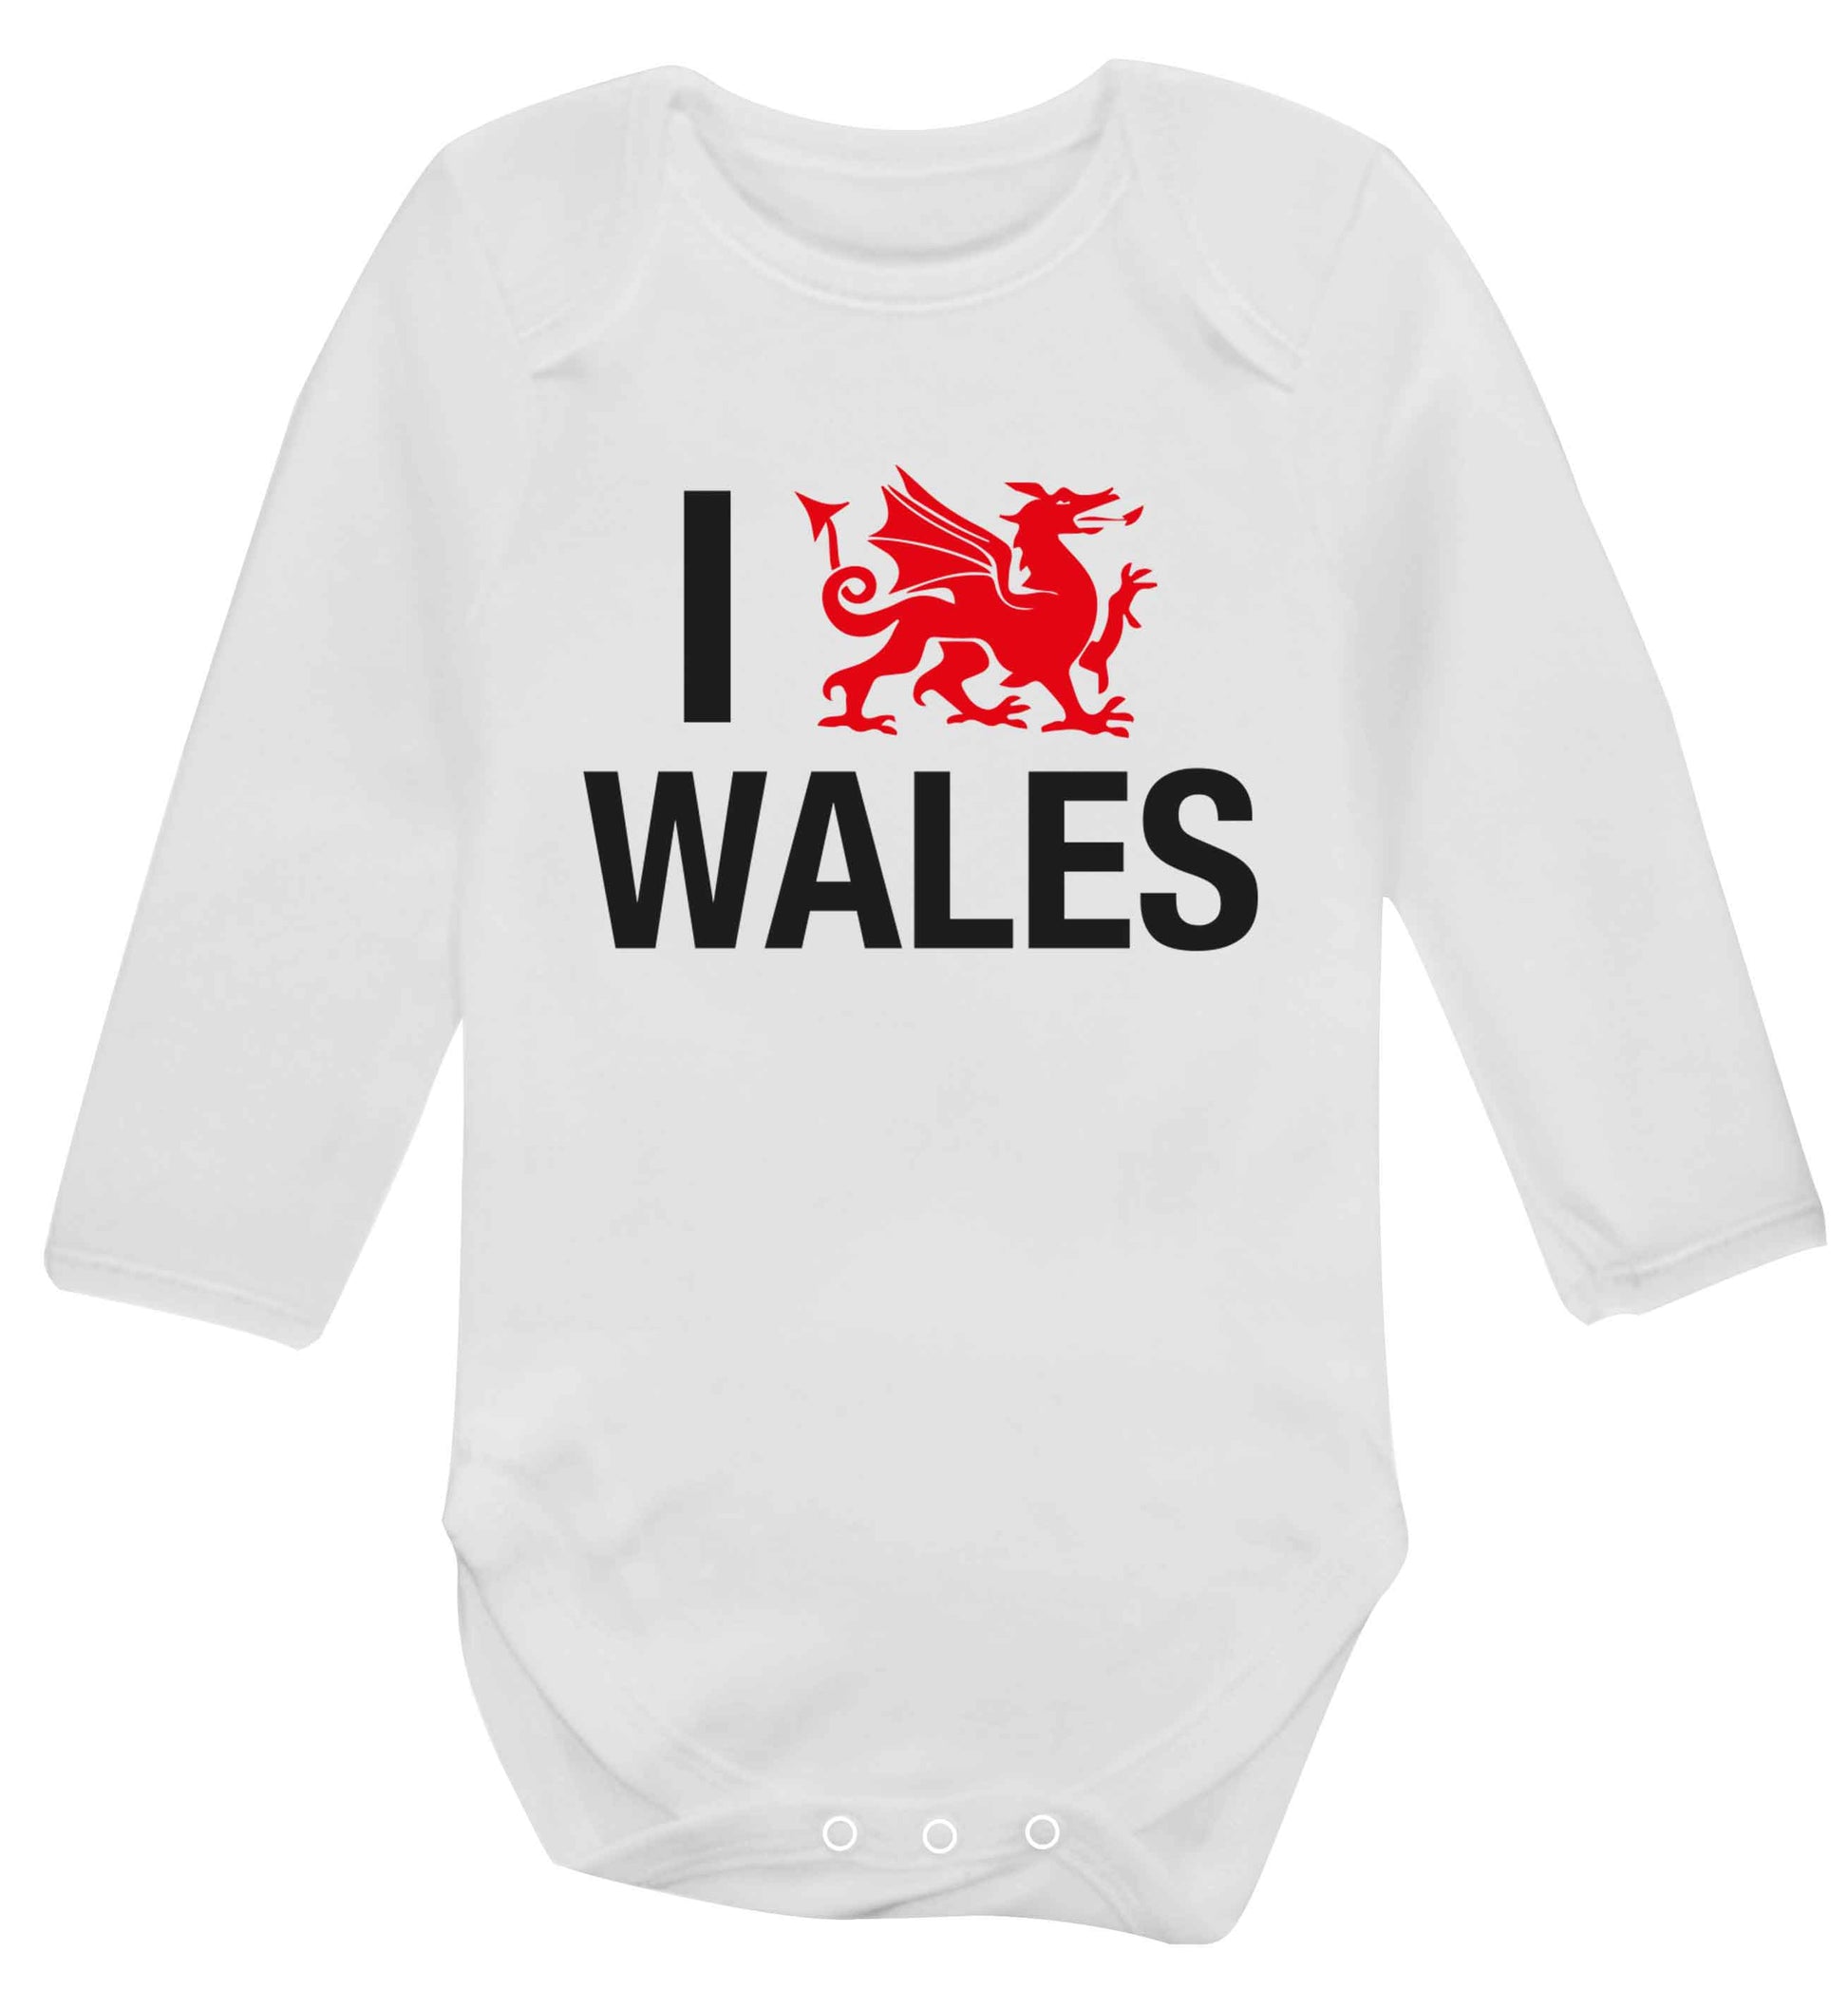 I love Wales Baby Vest long sleeved white 6-12 months